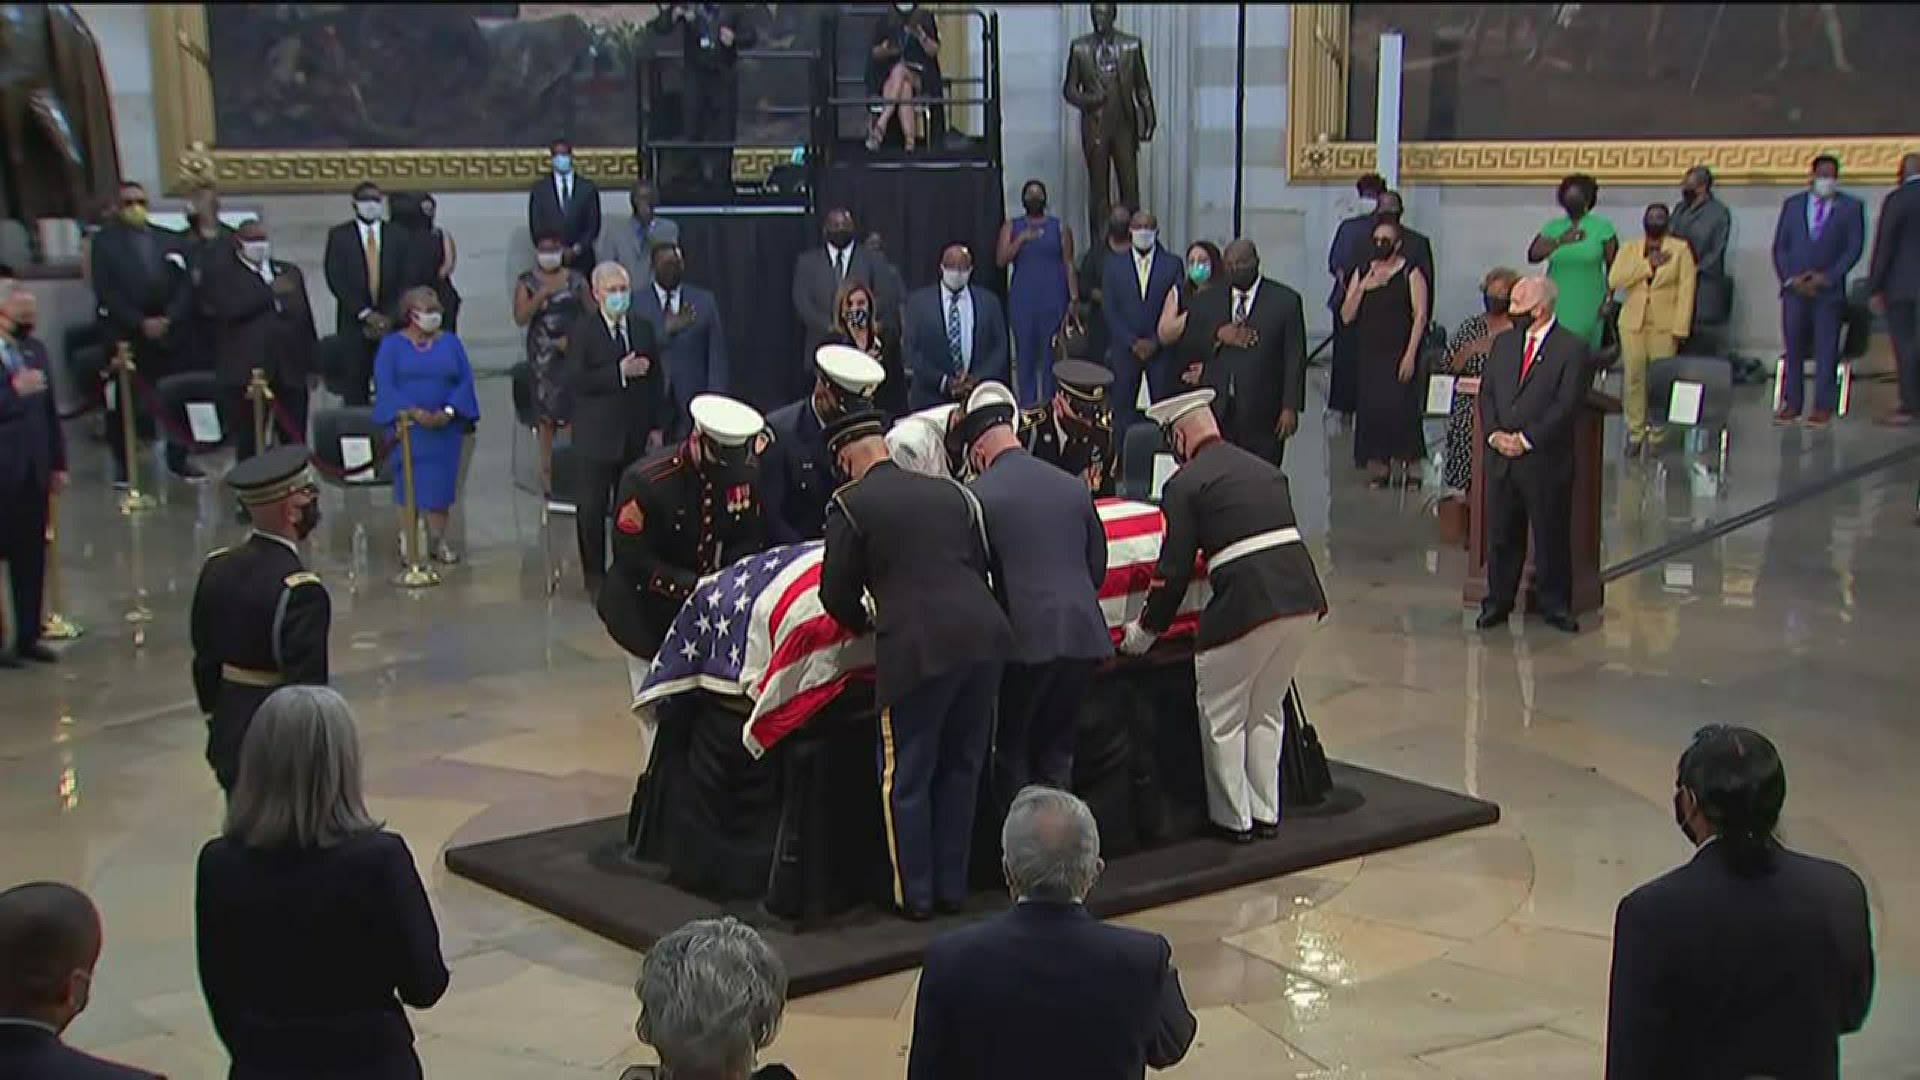 Congressional leaders pay their respects to the late civil rights icon Congressman John Lewis in Washington, D.C.